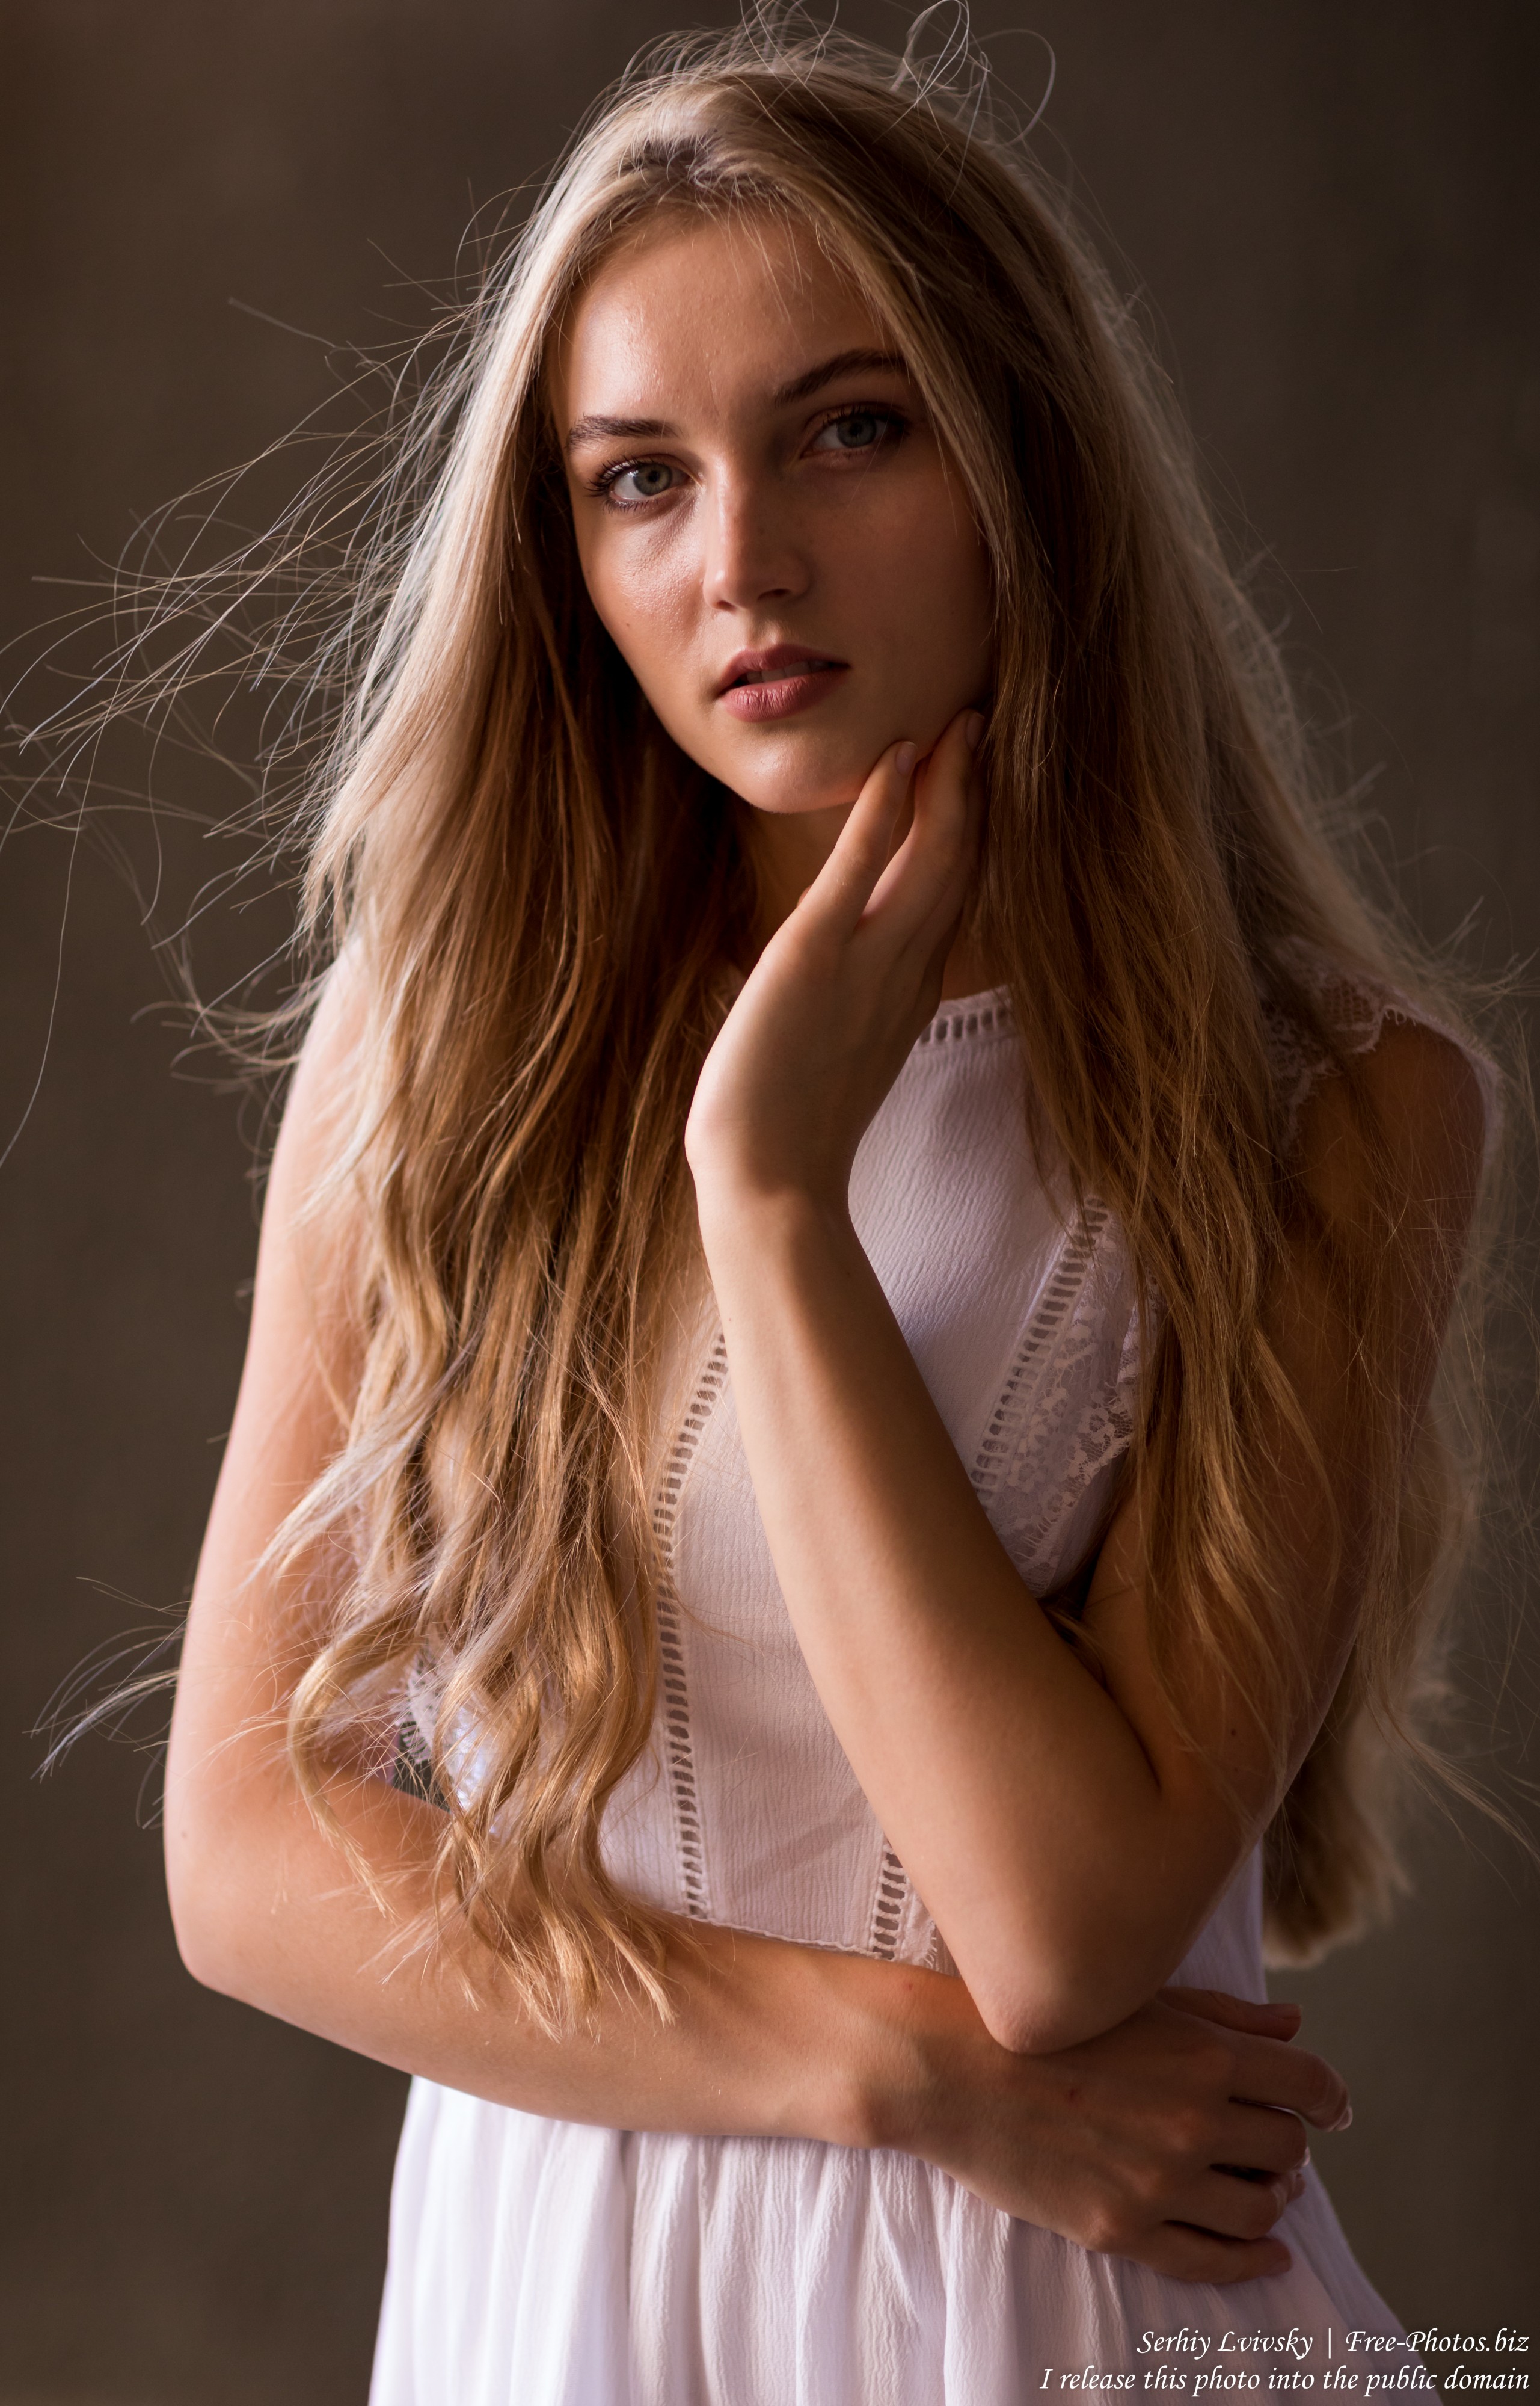 Yaryna - a 21-year-old natural blonde Catholic girl photographed in August 2019 by Serhiy Lvivsky, picture 14